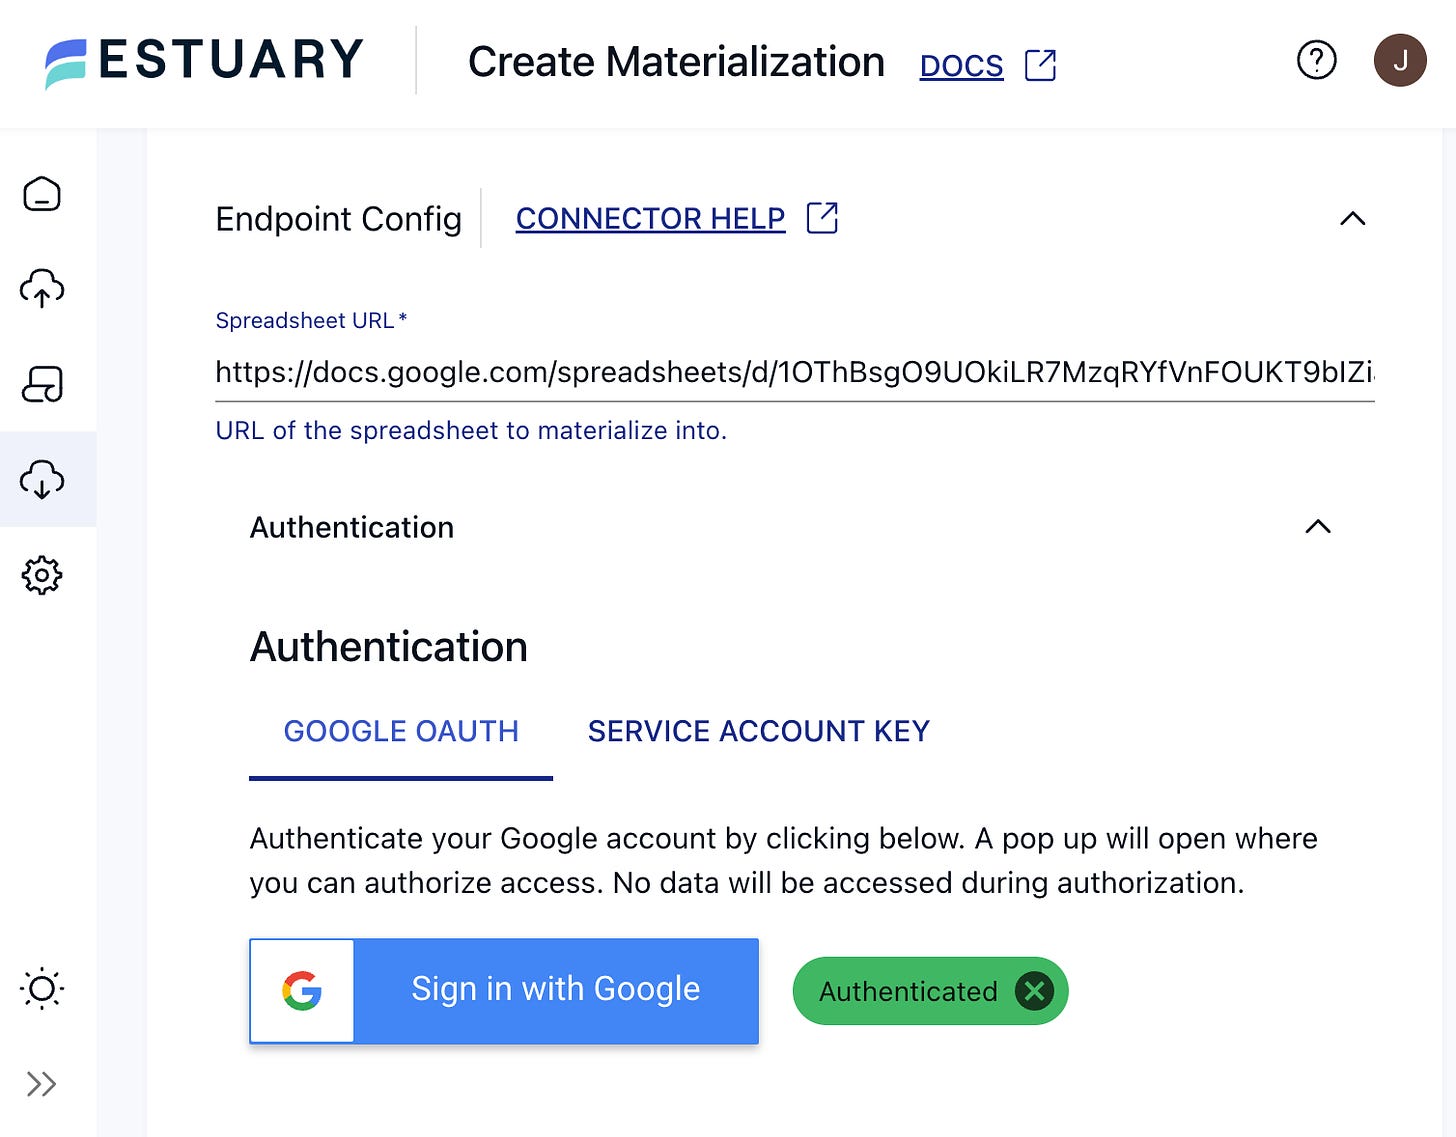 gpt real time pipeline - creating Estuary google sheets materialization